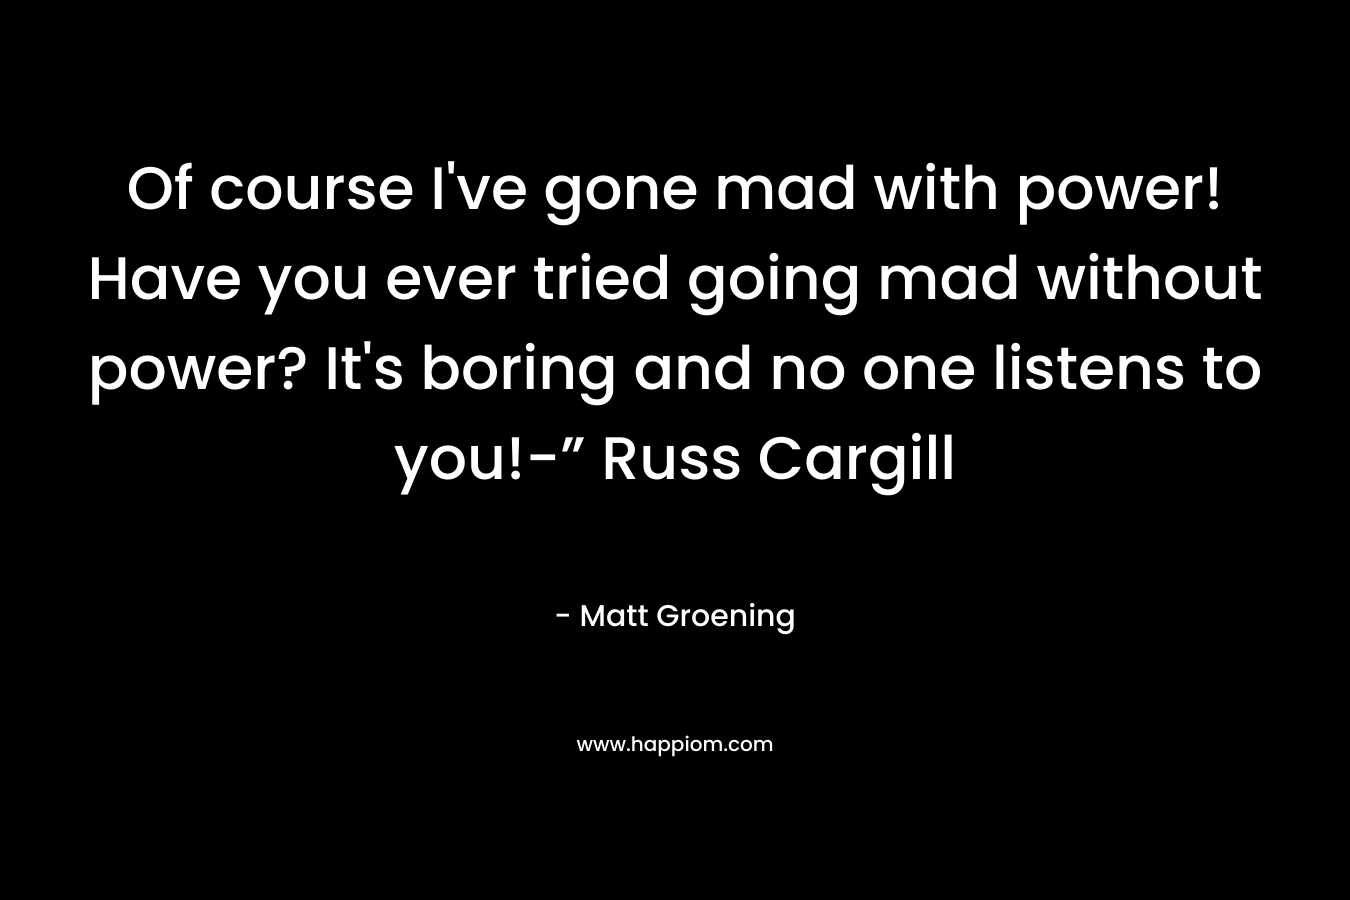 Of course I've gone mad with power! Have you ever tried going mad without power? It's boring and no one listens to you!-” Russ Cargill